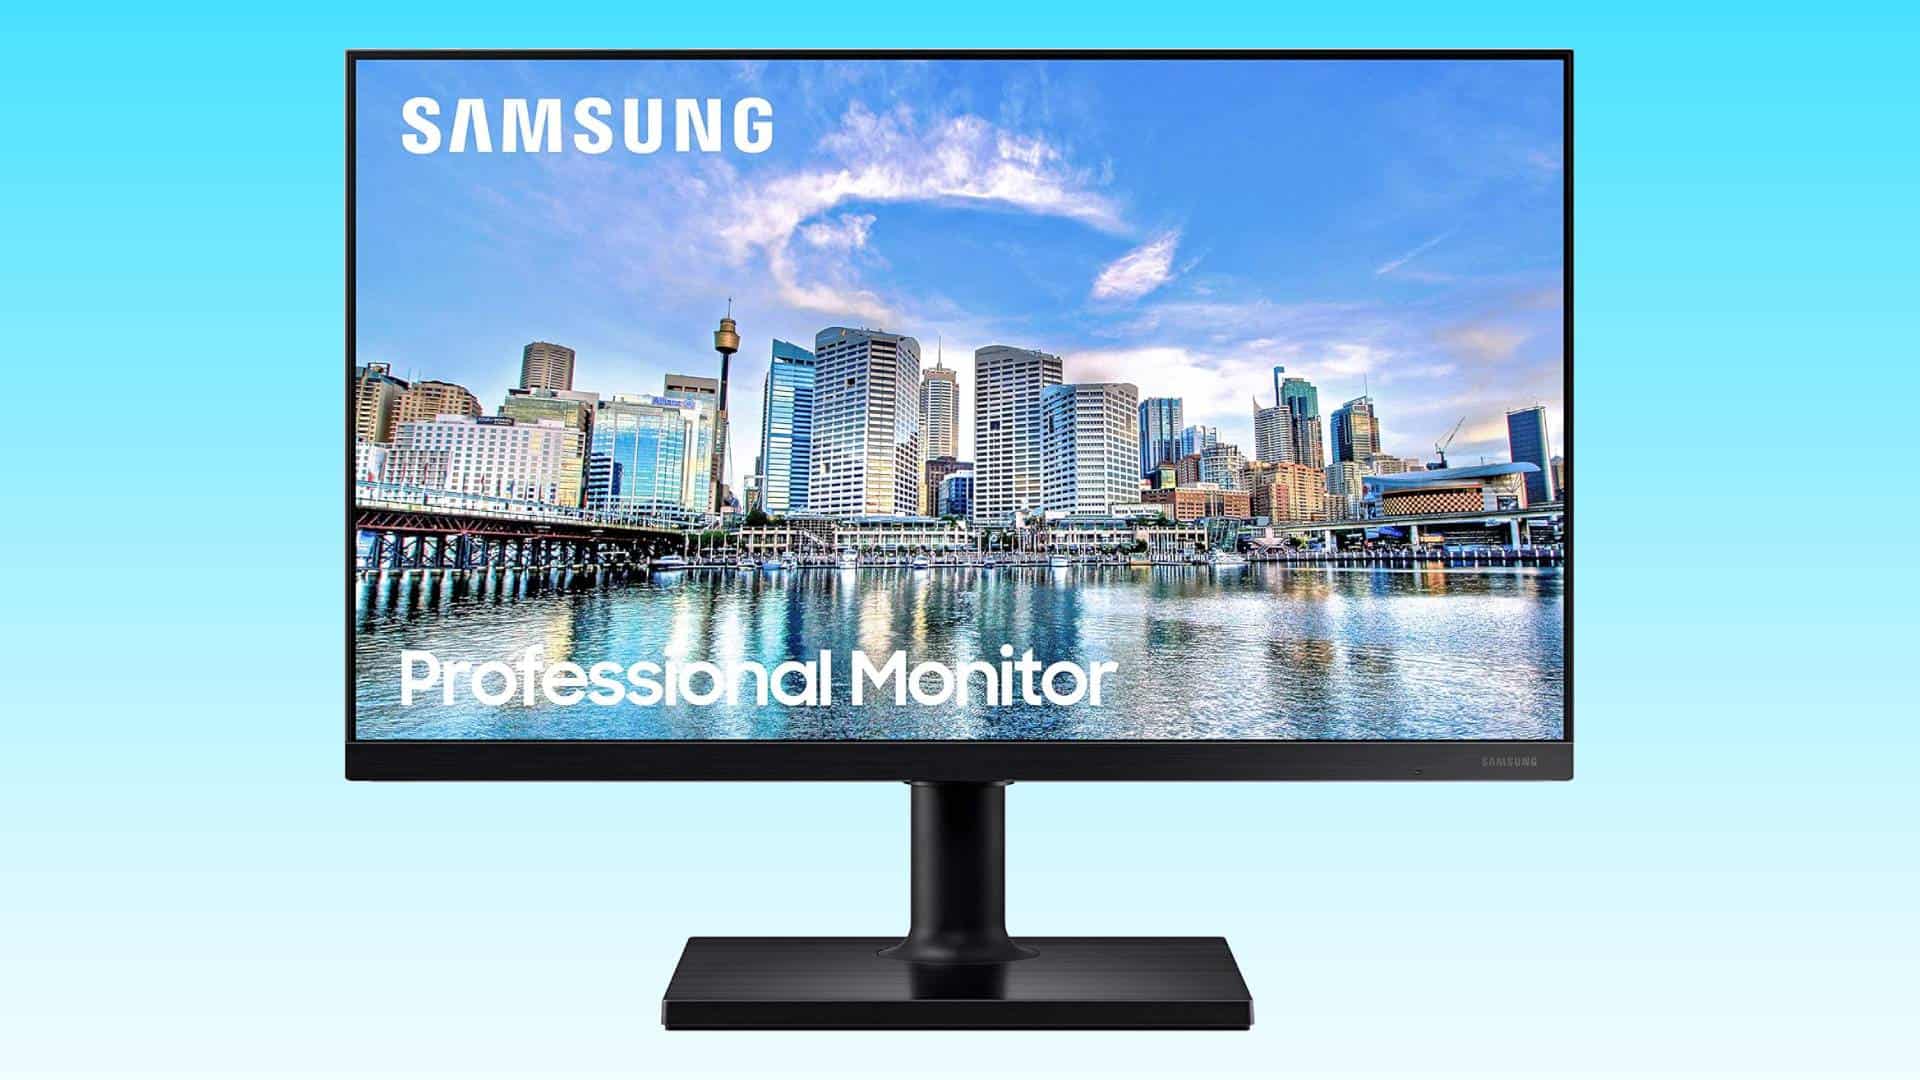 Samsung professional 27 inch monitor displaying a cityscape image.